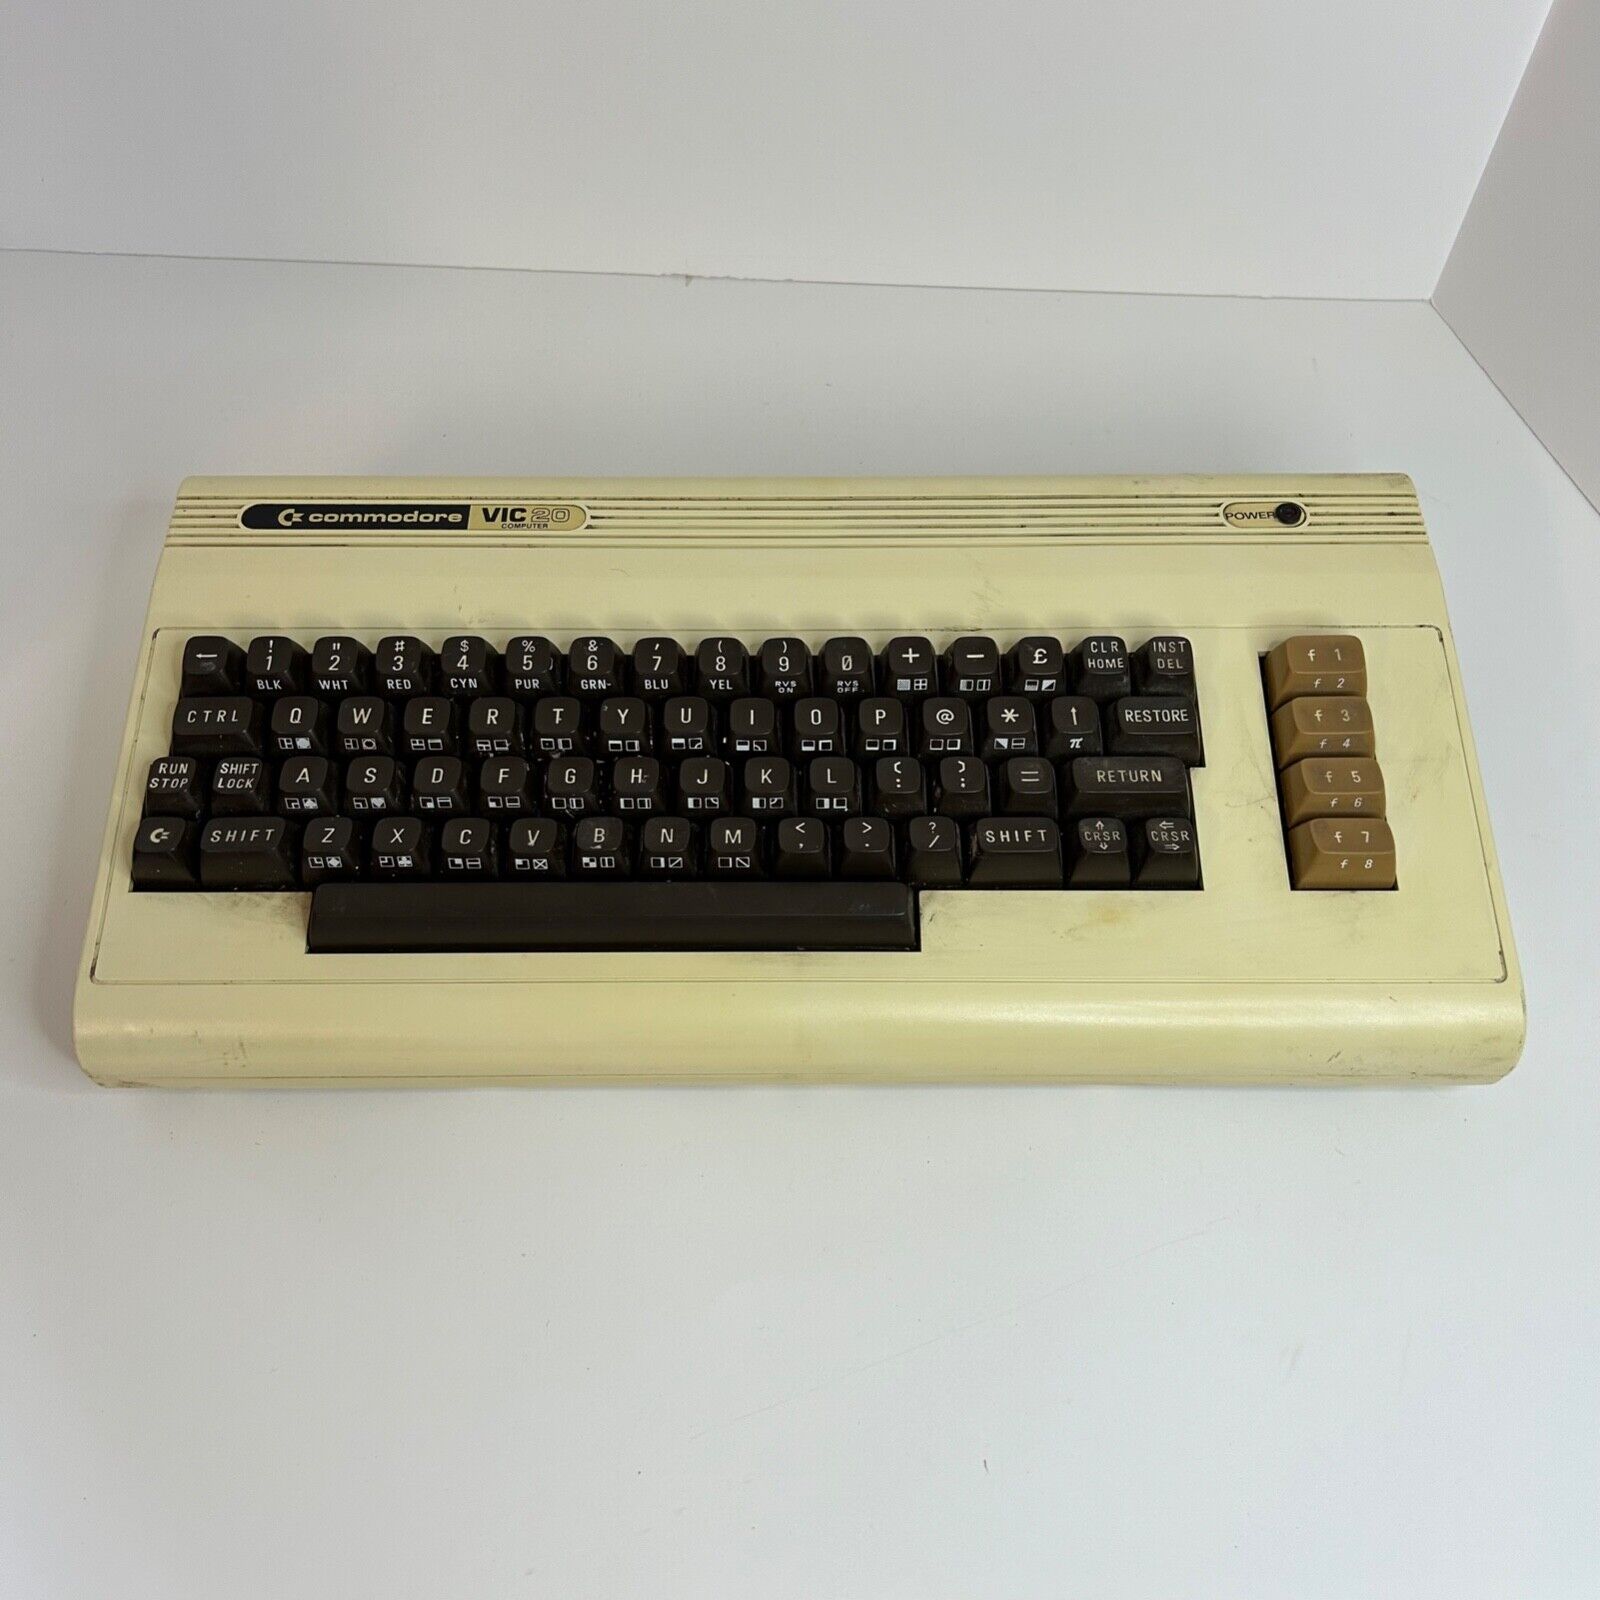 Vintage Commodore VIC 20 Computer Untested No Power Adapter For Parts/Repair